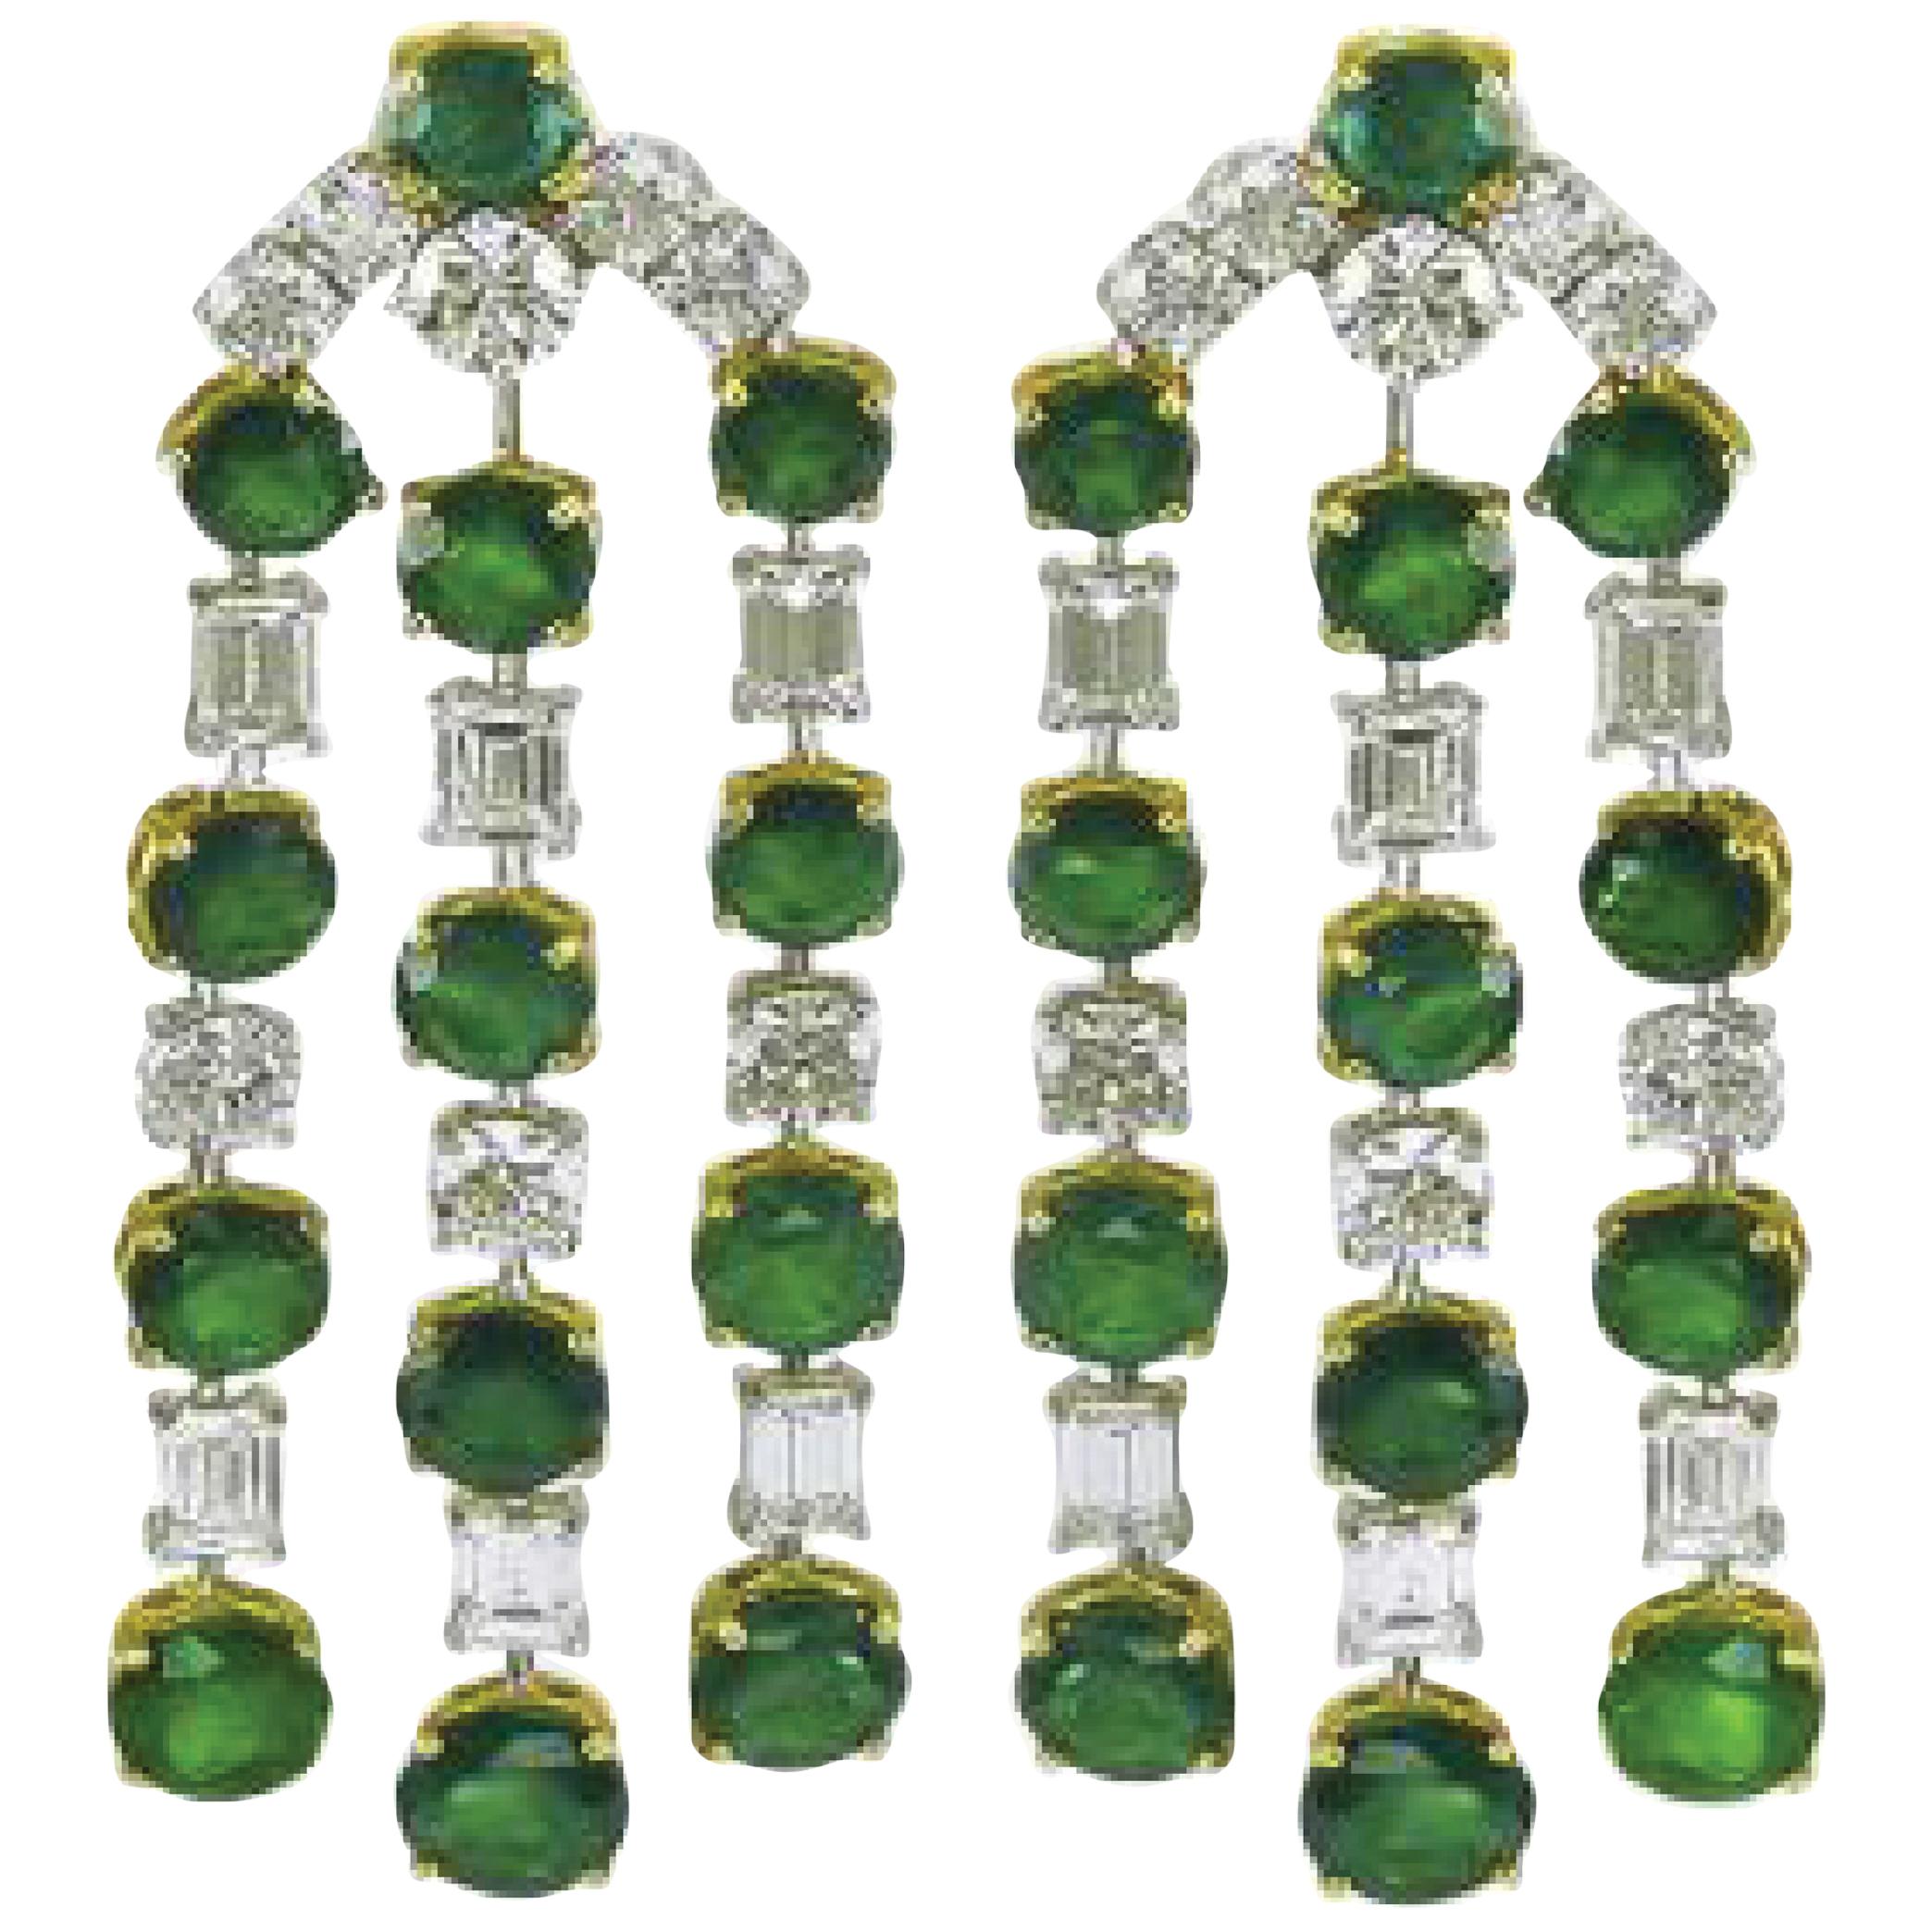  Sophia D. Emerald and Diamond Chandelier Earrings in Platinum and Yellow Gold